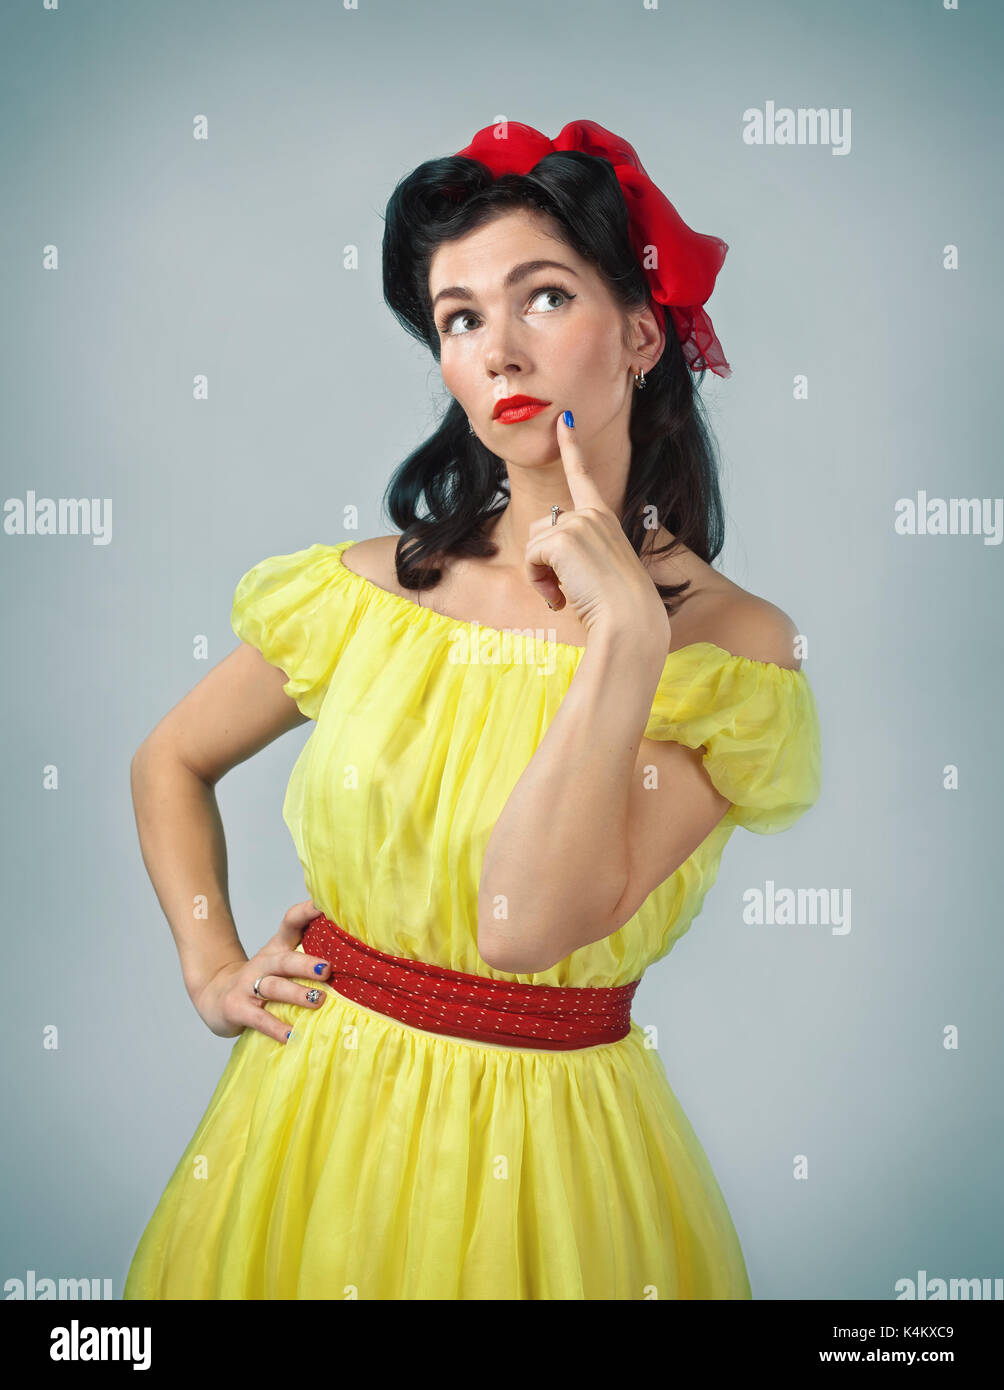 Woman With Pinup Style Stock Photo by ©smmartynenko 107026788